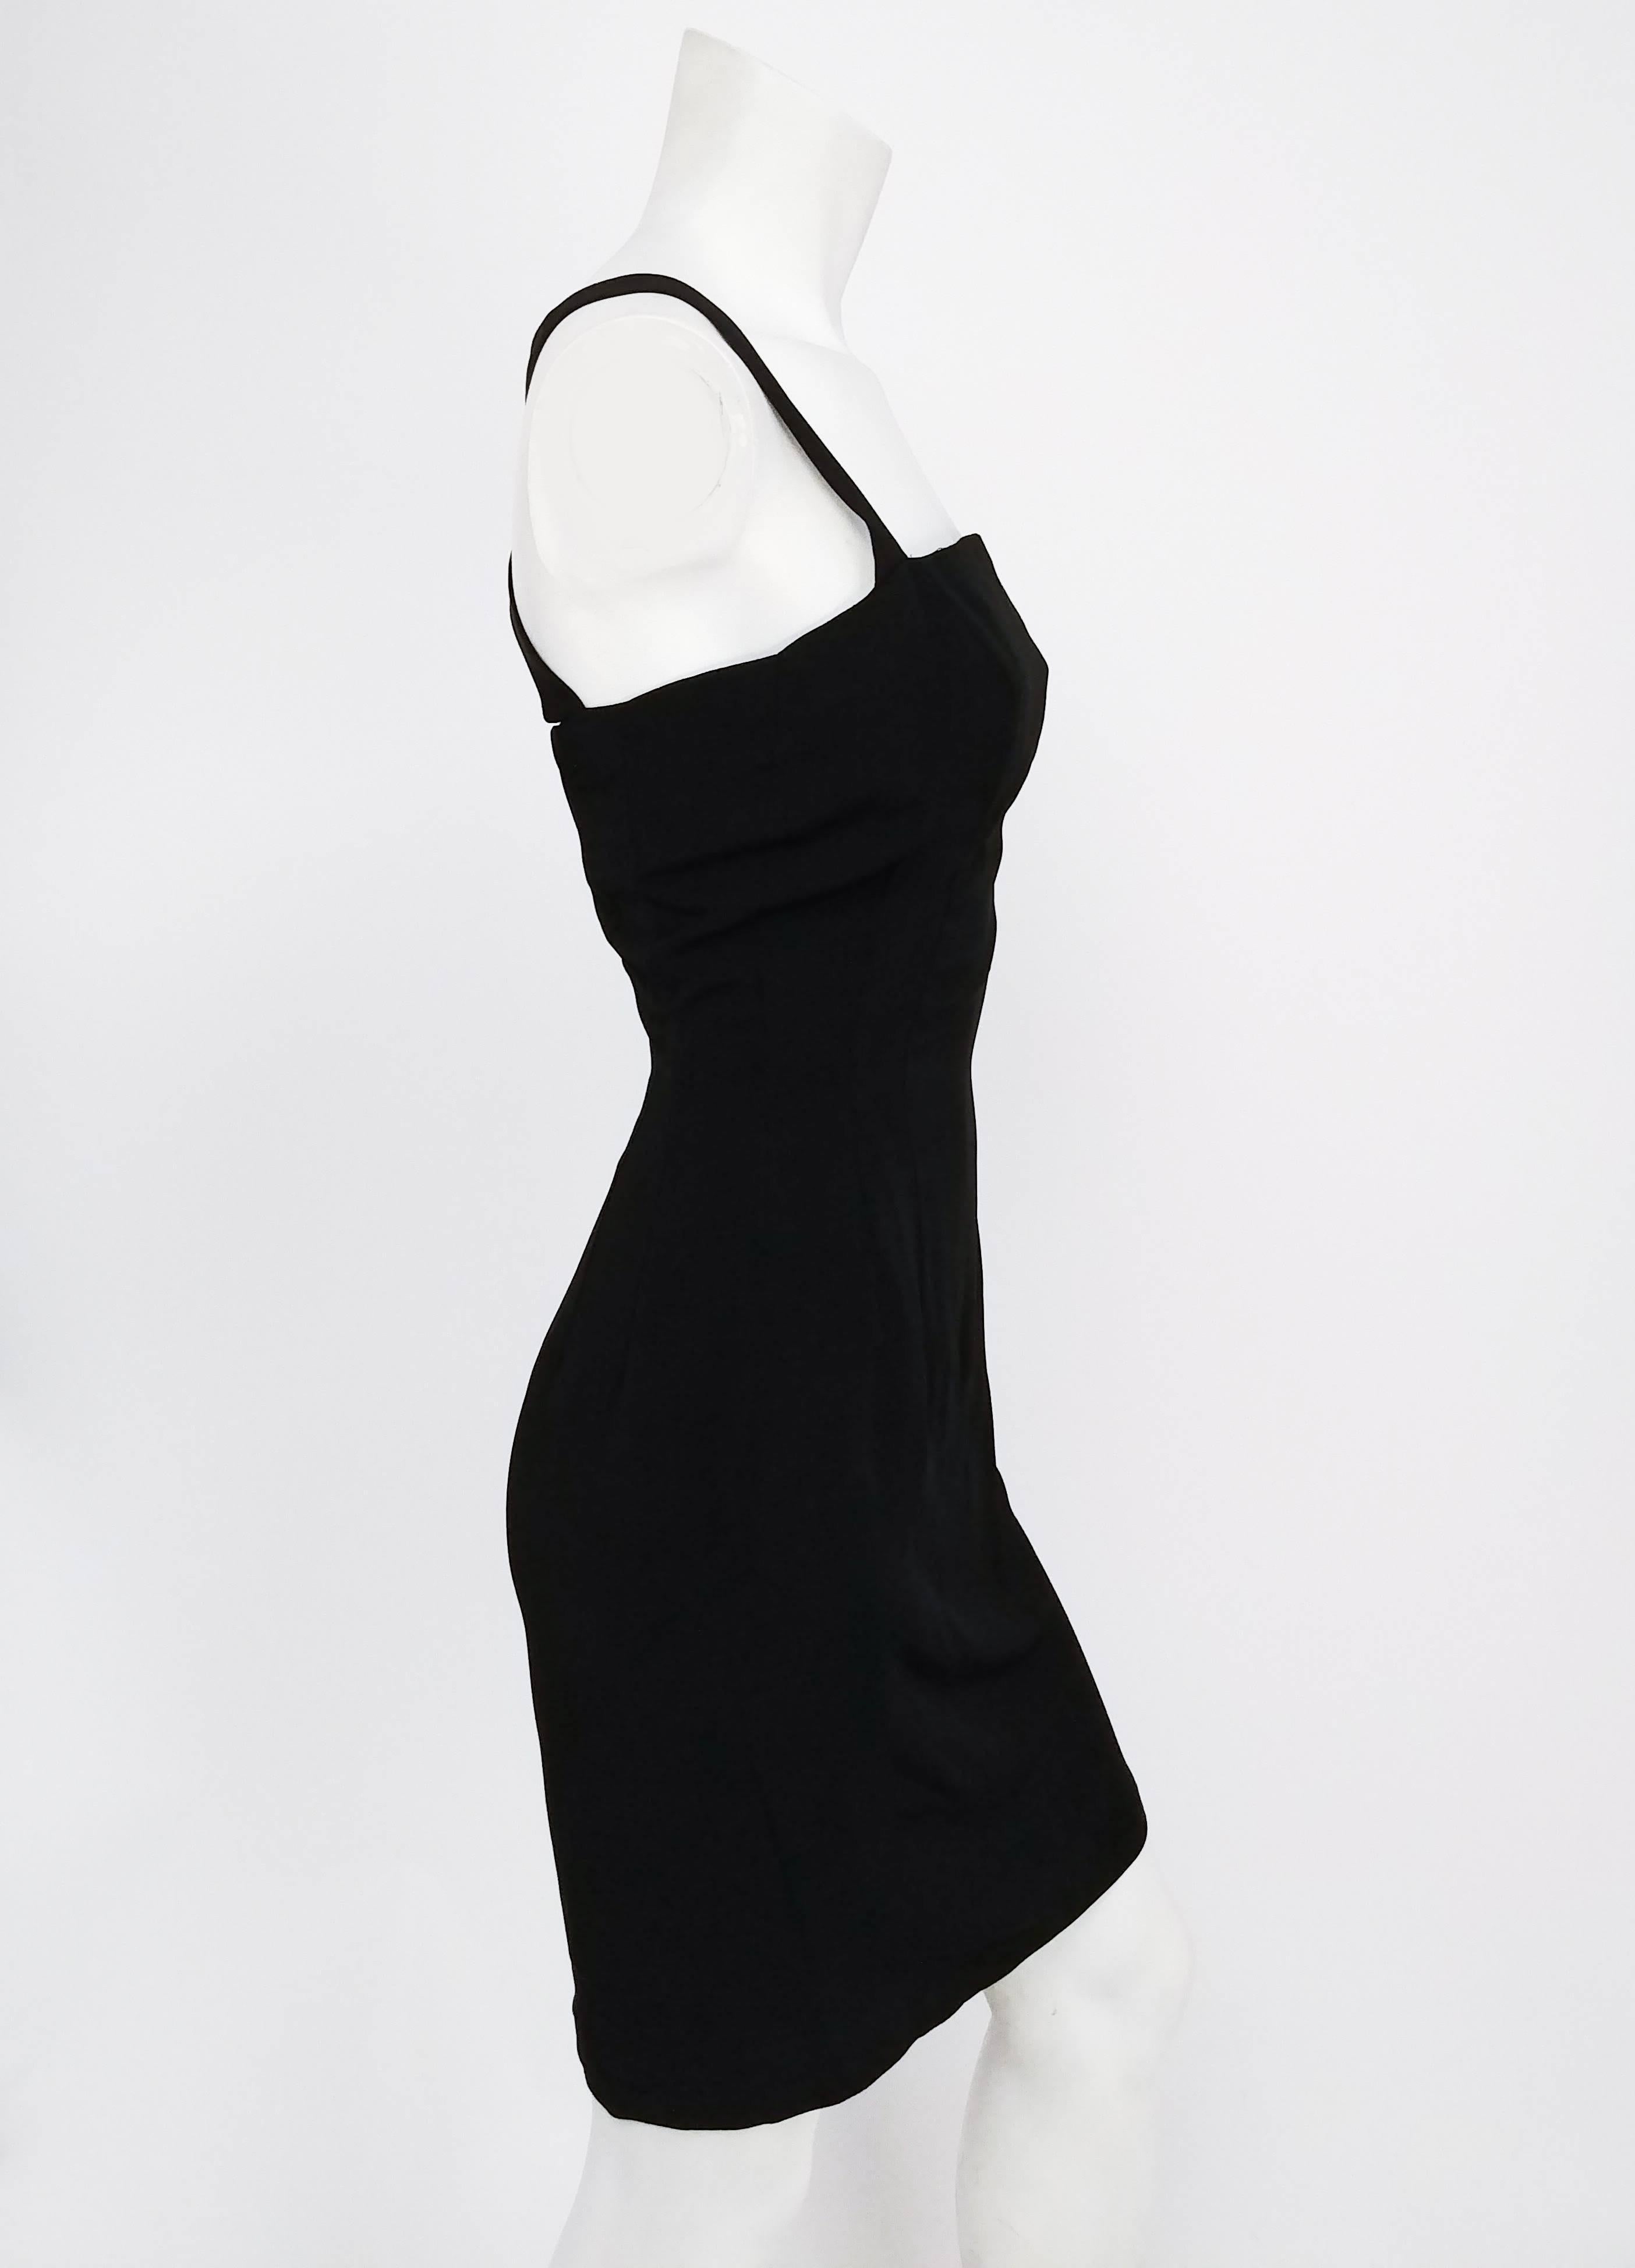 1960s Lilli Ann Black Crossback Cocktail Dress. Square neckline with crossed back strap detail. Mid thigh length. 